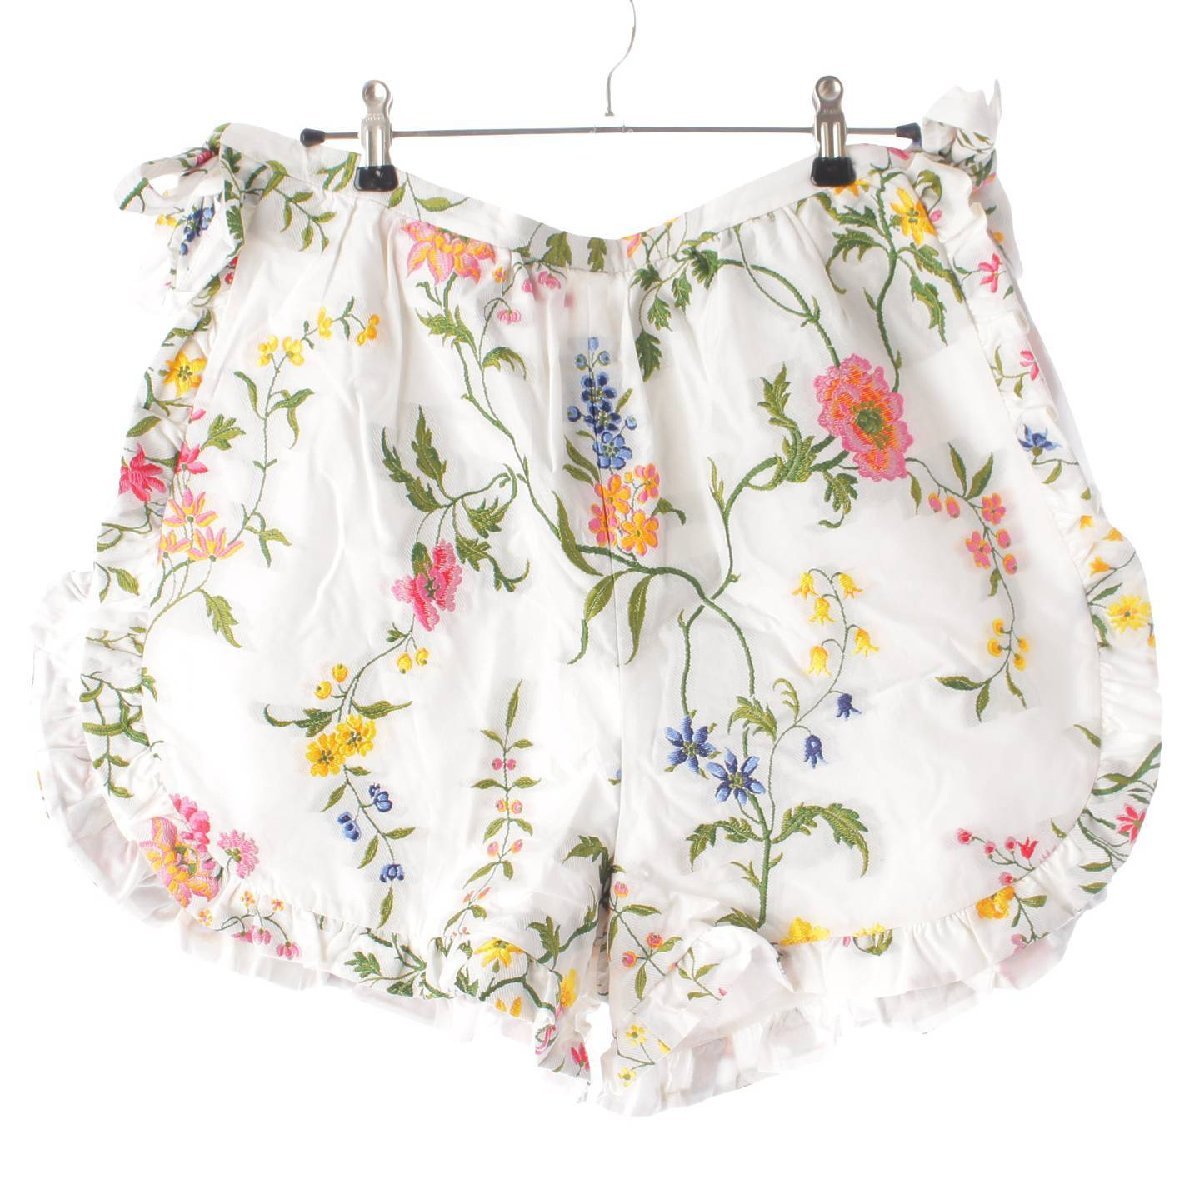 [ Christian Dior ]Christian Dior 23SS Petites Fleurs frill short pants 321P04A3711 white 36 [ used ]199888